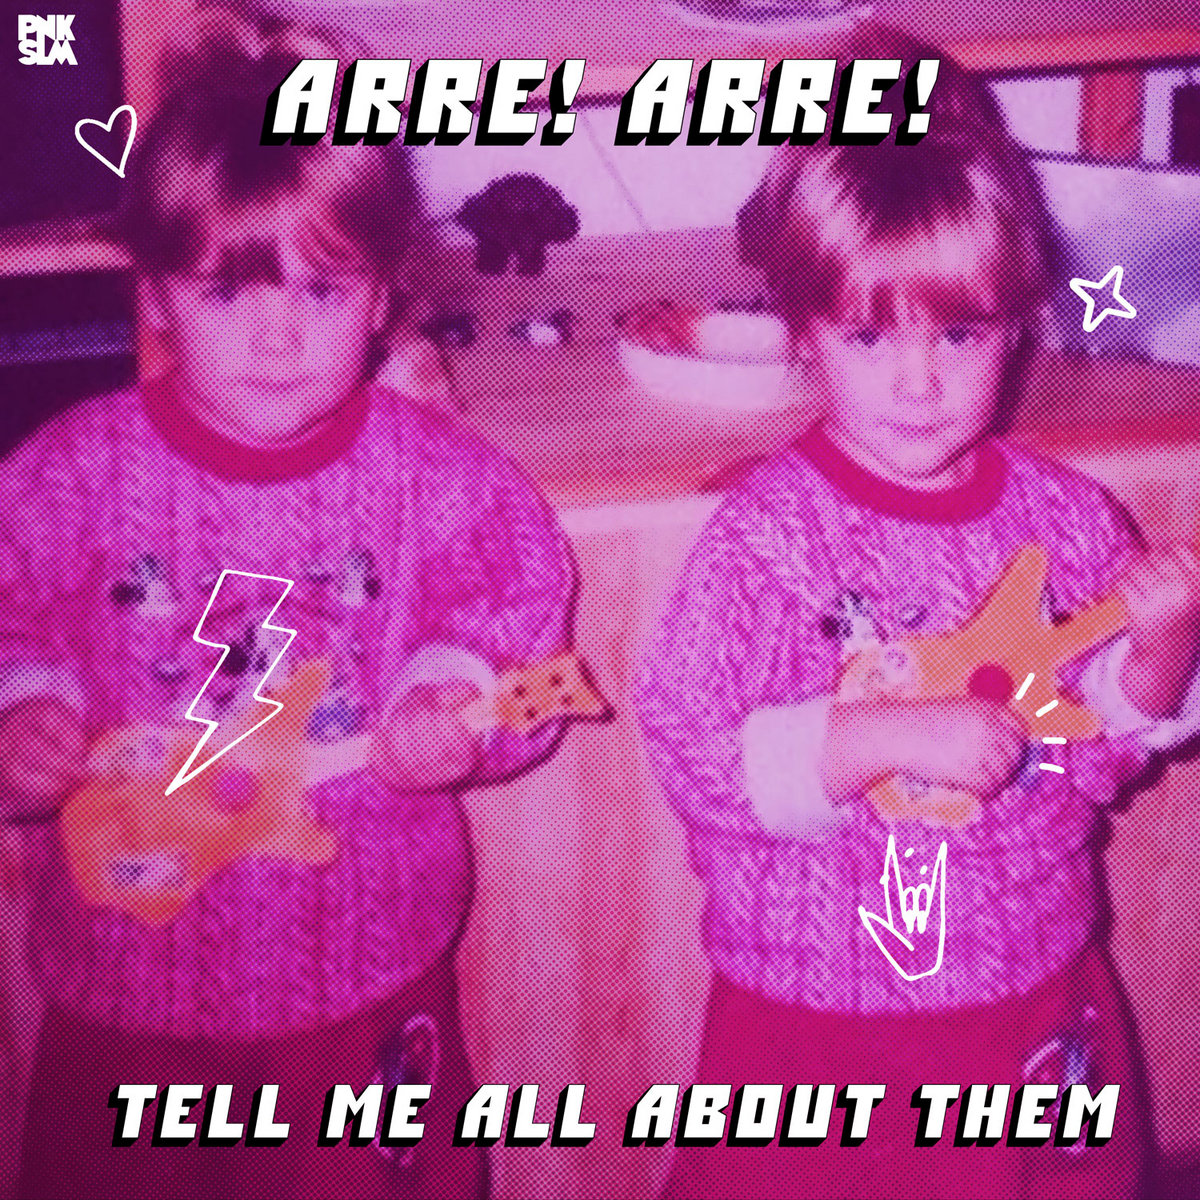 Arre! Arre! - Tell Me All About Them - LP